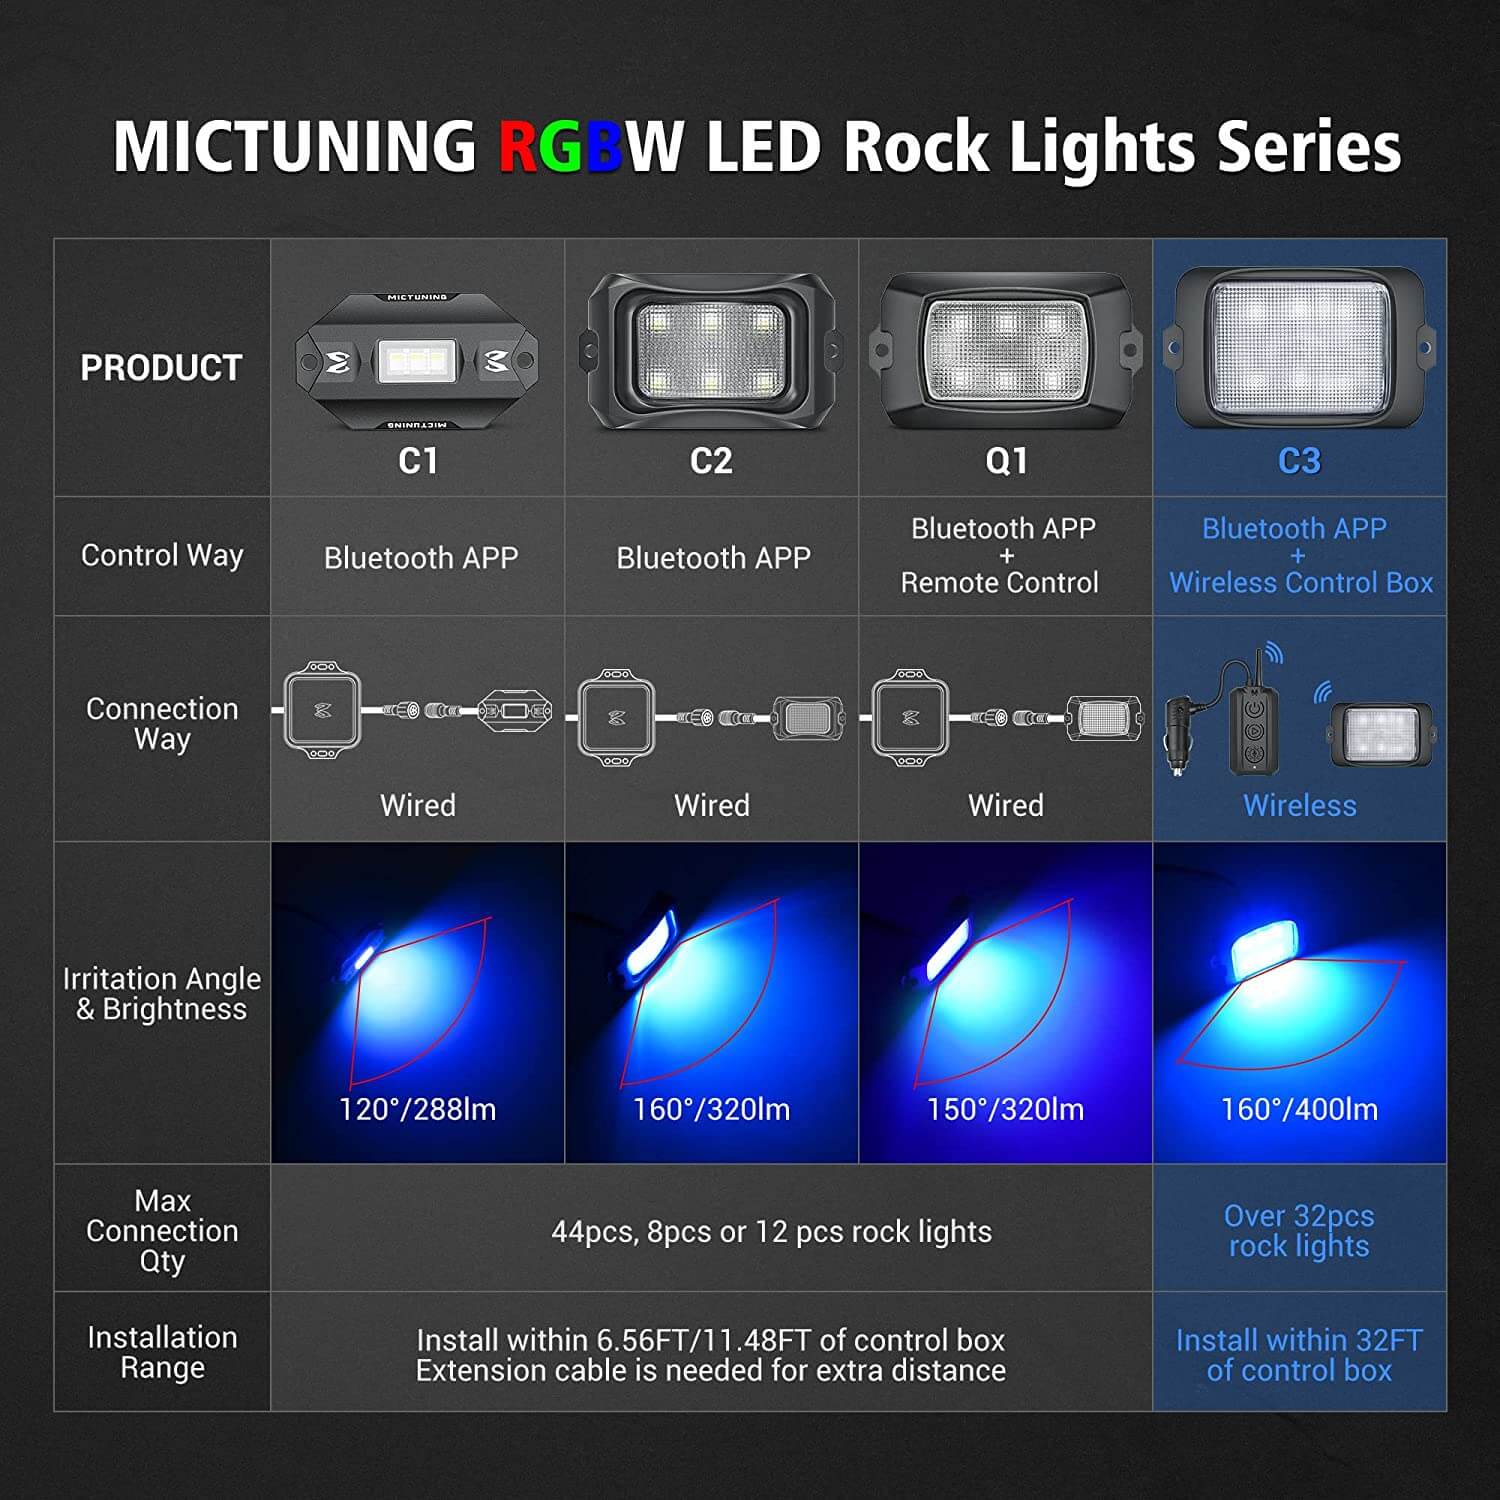 C3 Extensible RGBW LED Rock Lights - 32 Pods Wireless Control Multi-Color Neon Underglow Lights